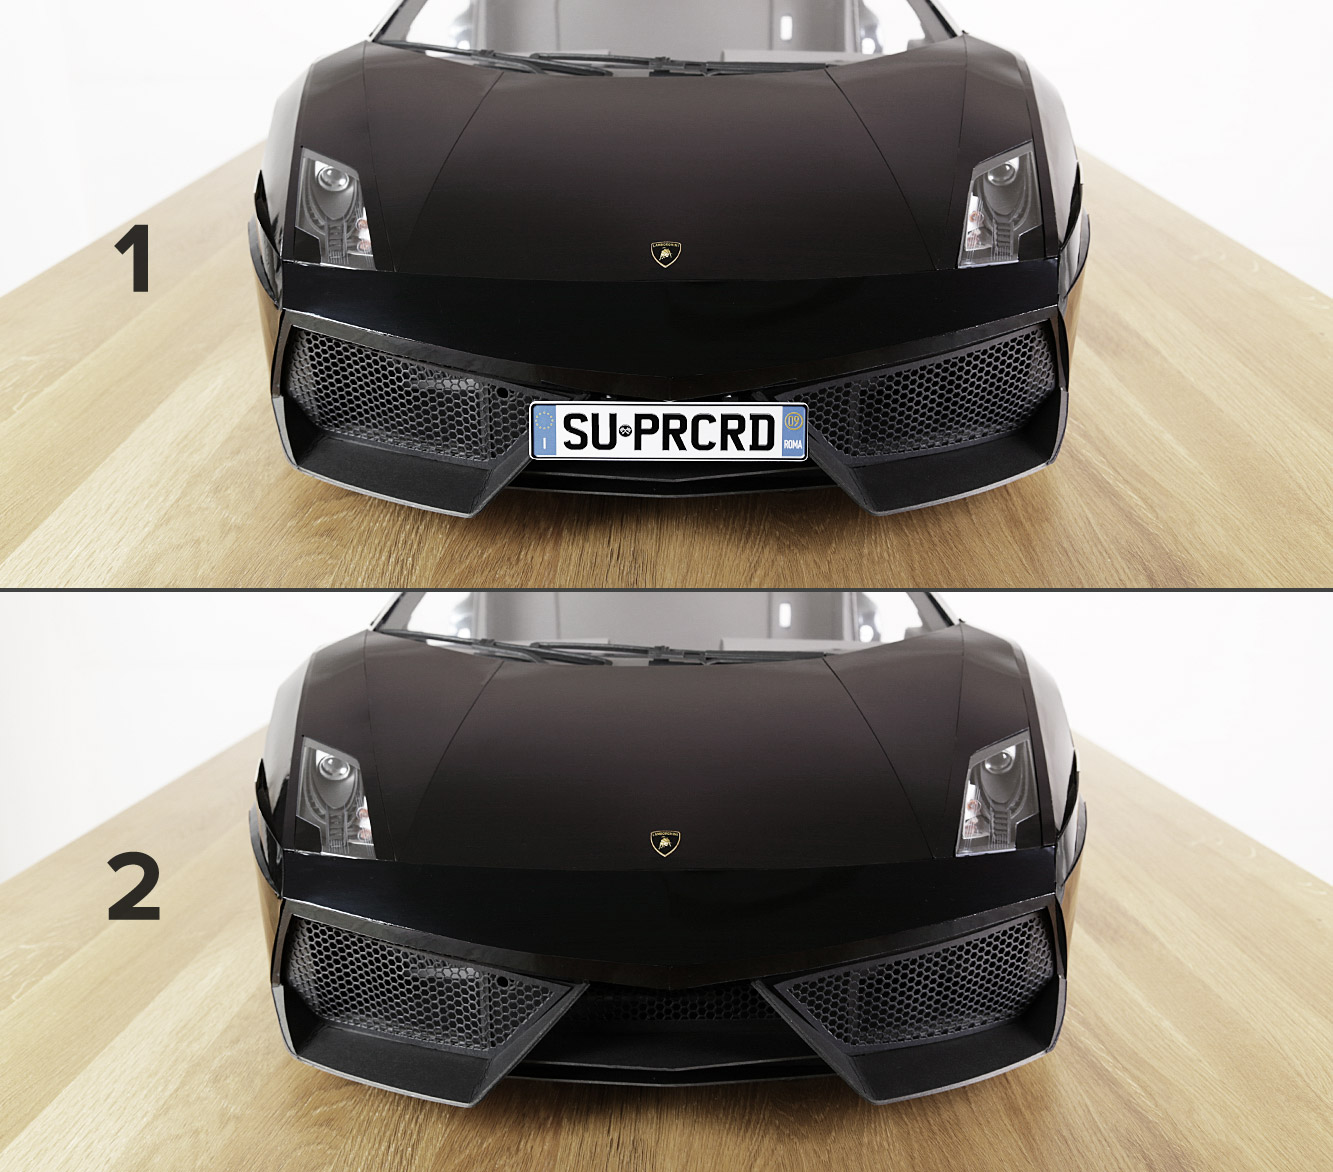 I asked my Instagram followers if they preferred with (top) or without (bottom) a number plate. Answers were mixed, but the majority preferred without.